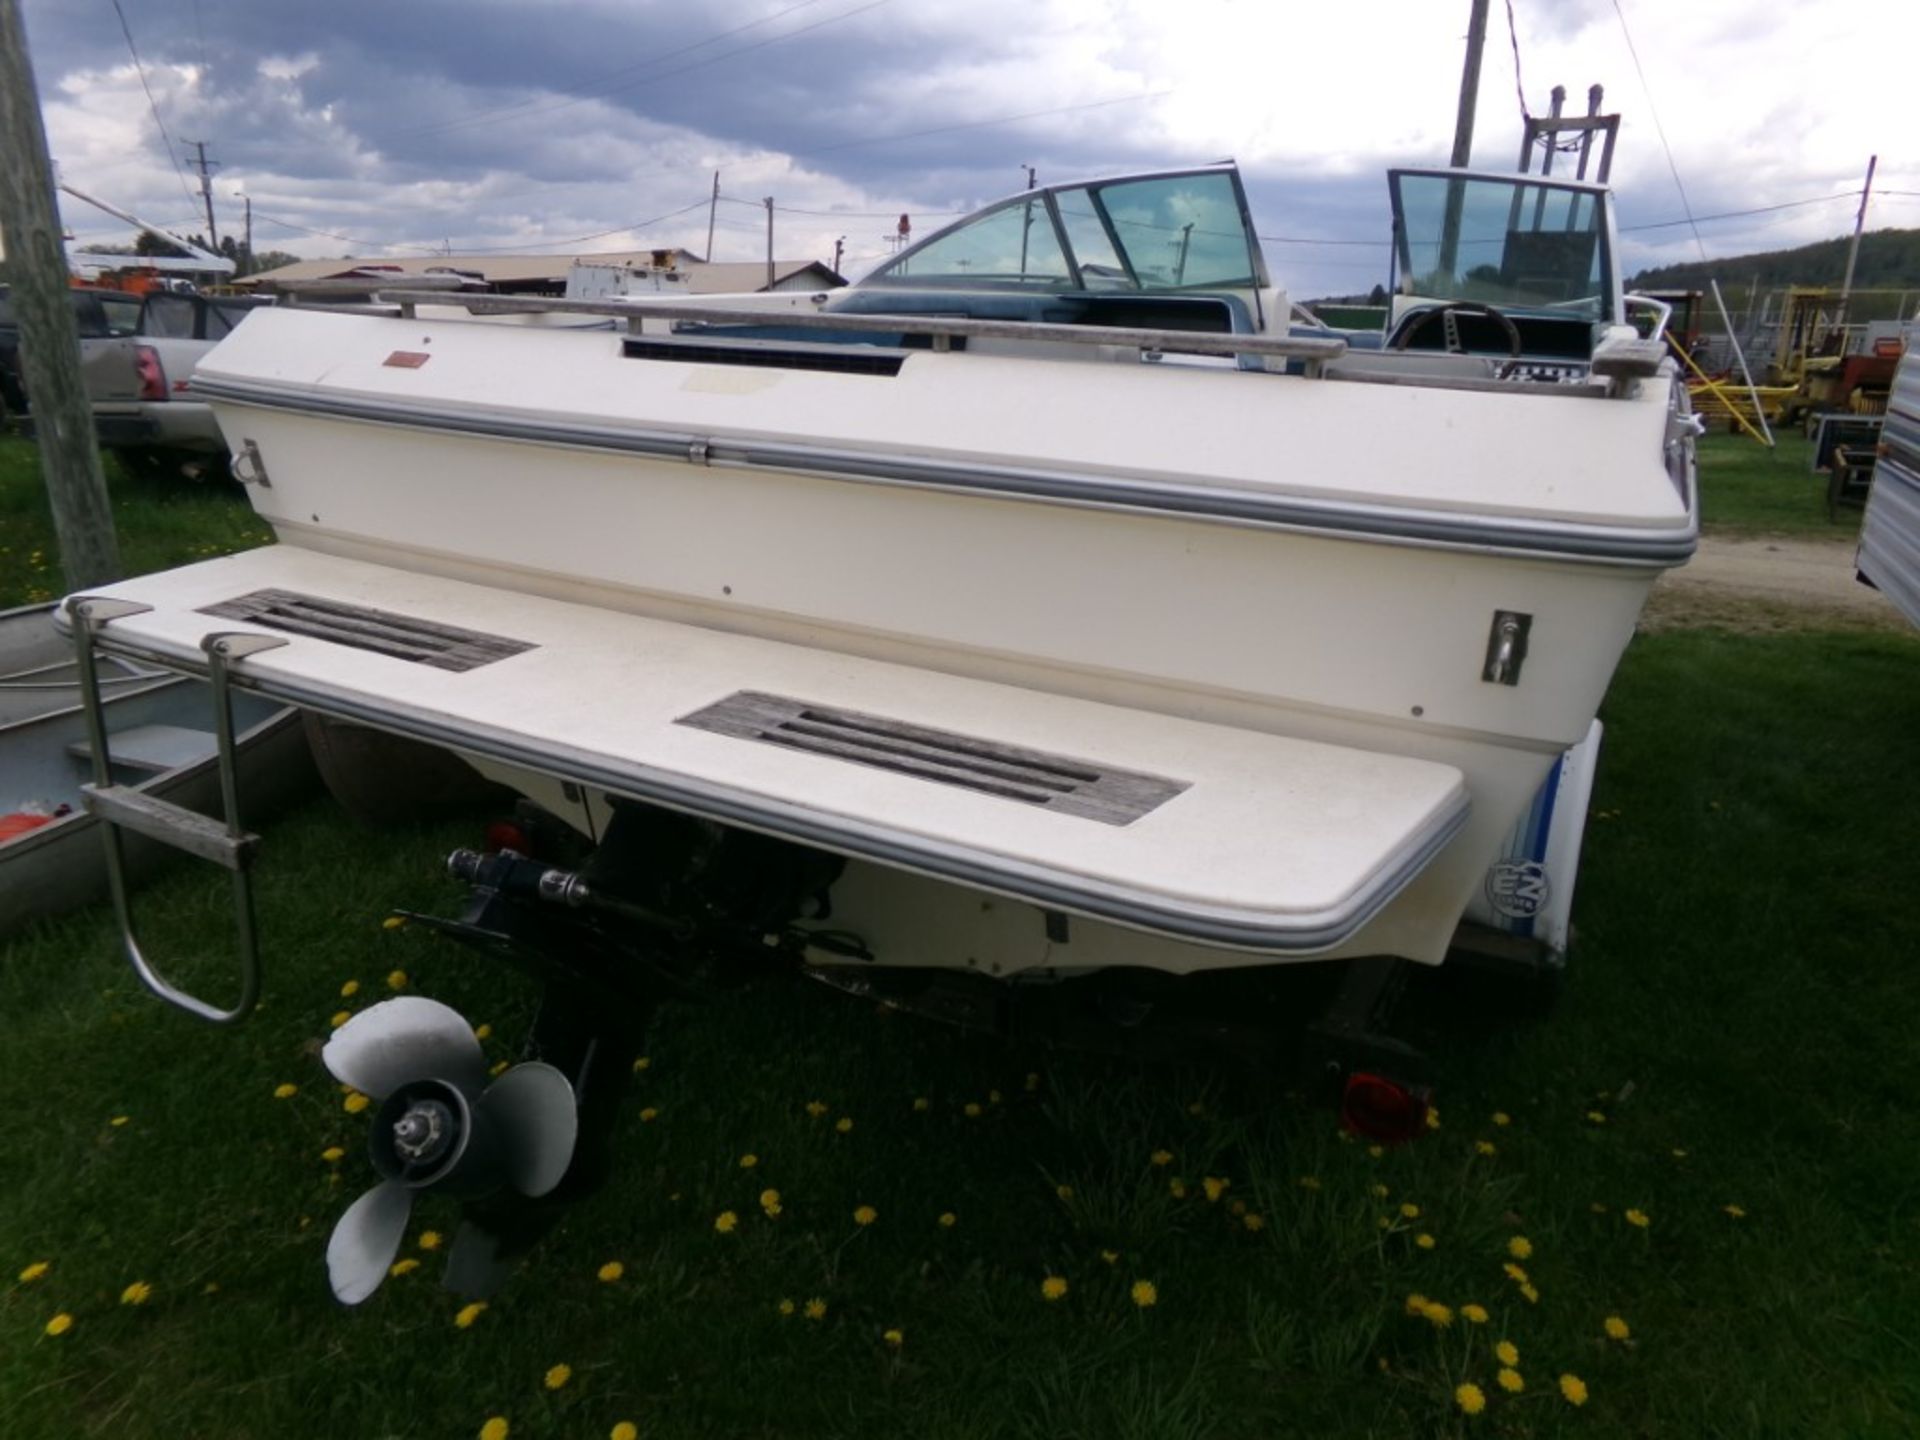 1982 Sea Ray Open Bow Fiberglass Boat, Vin #SER45T821281 on Single Axle Trailer with 470 - Image 2 of 3